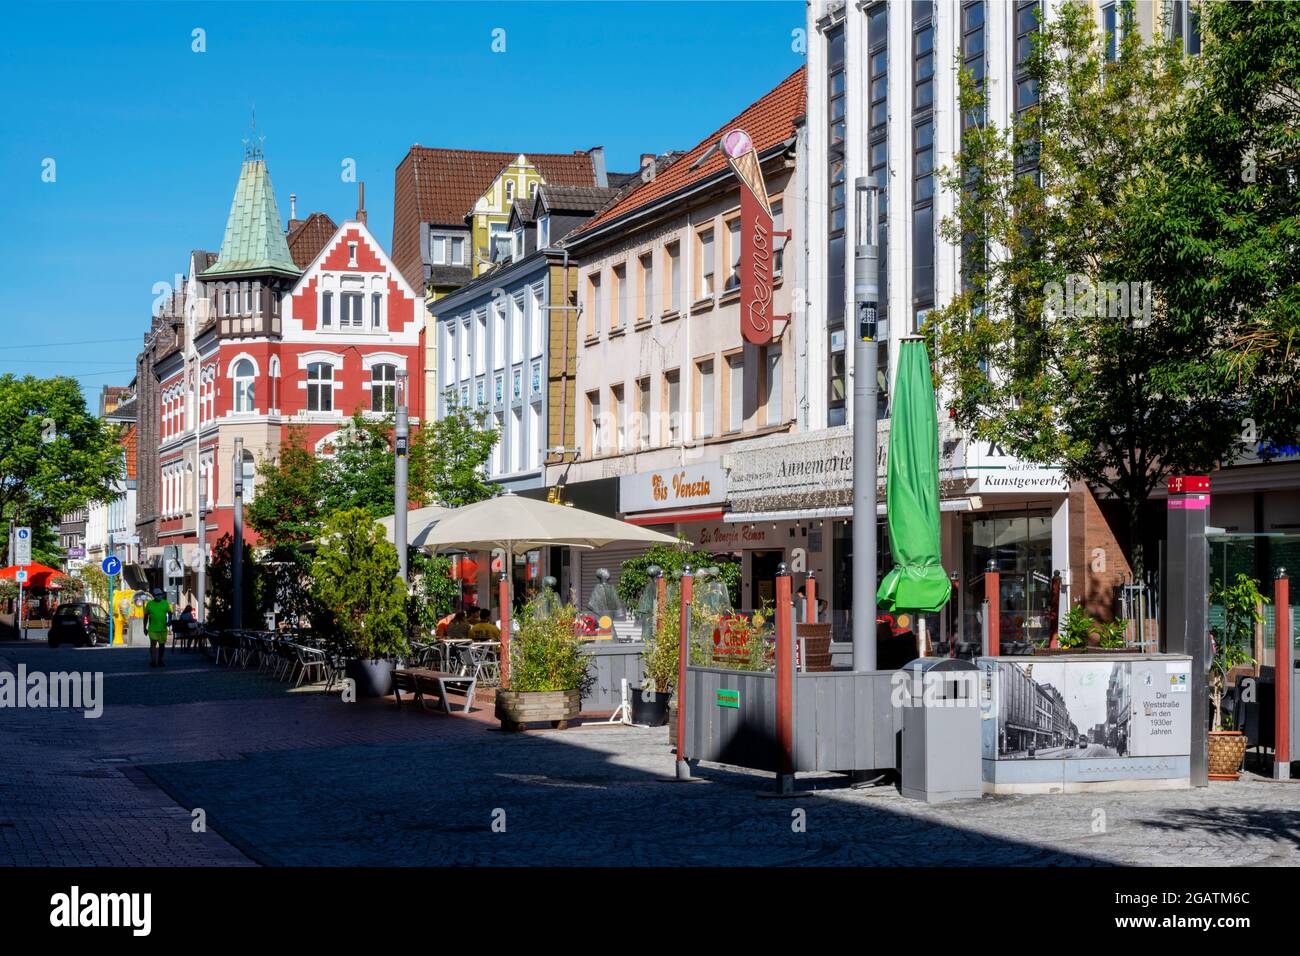 Hamm germany hi-res stock photography and images - Alamy